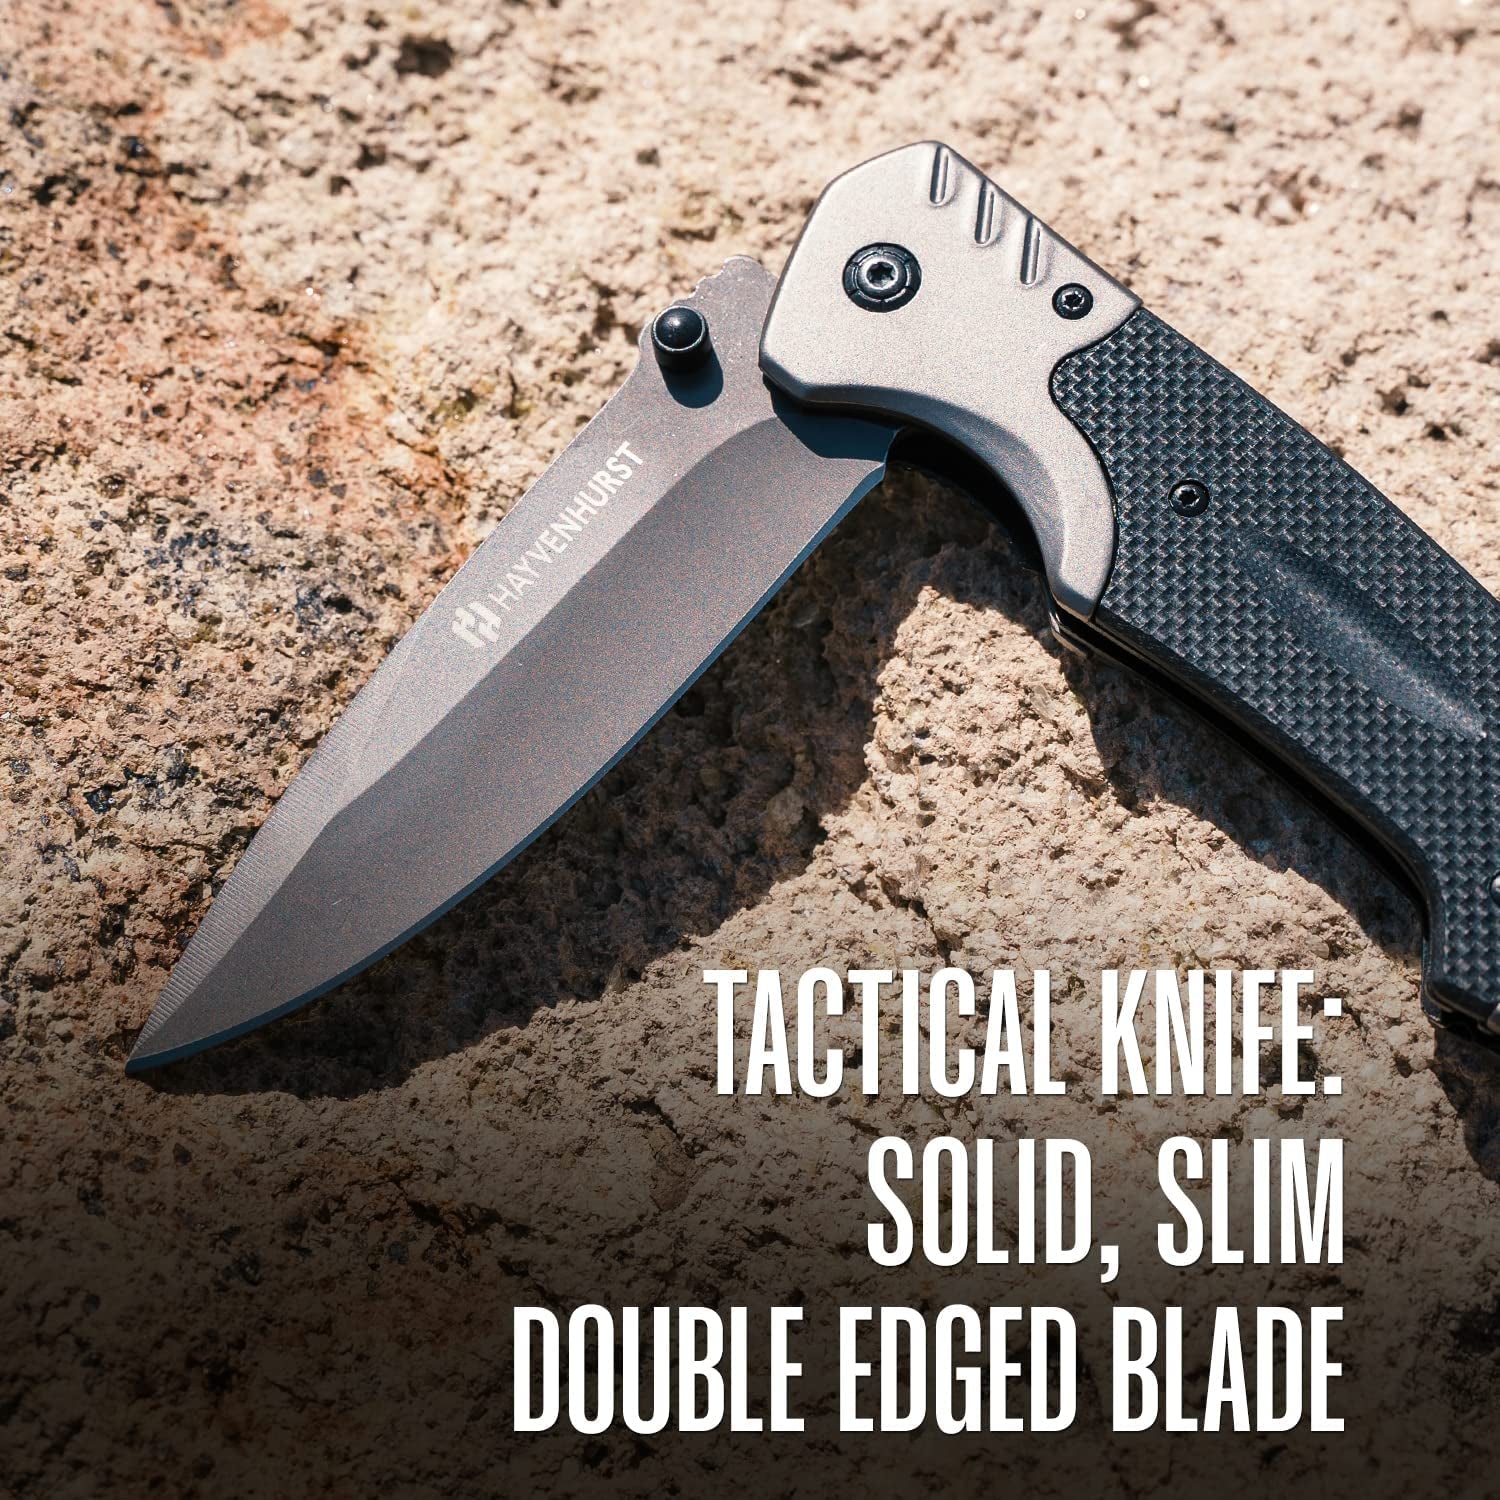 Tactical Knife - Folding Knife - EDC Knife - Pocket Knife for Men with Pointed Stainless Steel Blade and Aluminium Handle - Everyday Carry Knife with Pocketclip, Bottle Opener